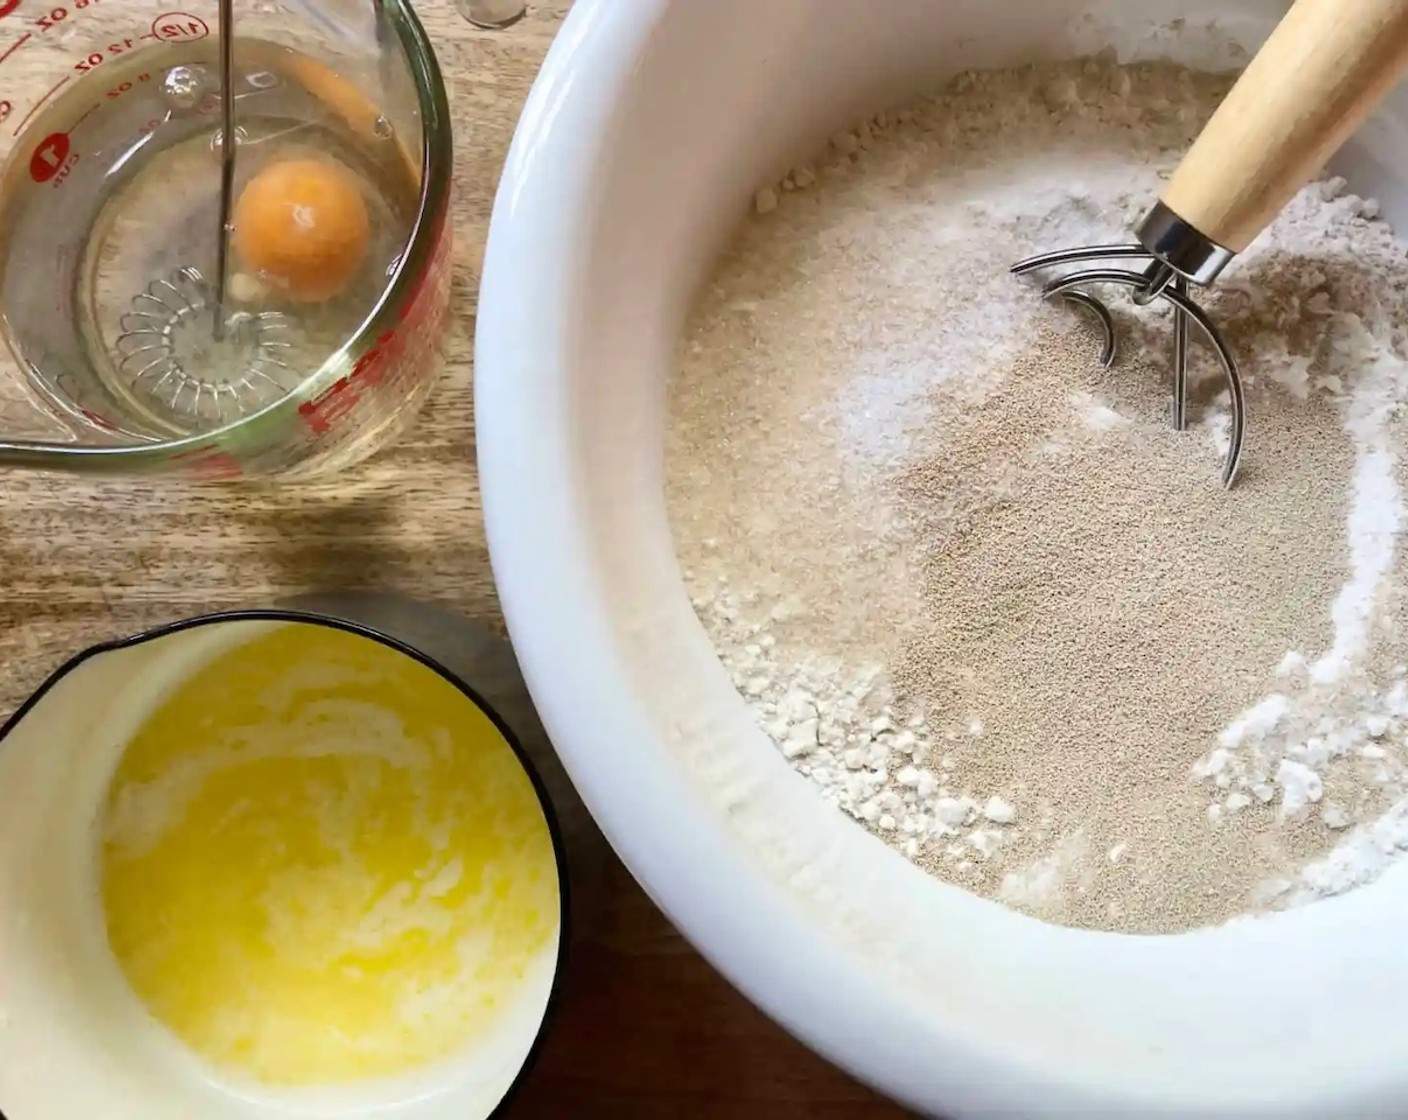 step 1 In a large bowl, whisk together the Unbleached All Purpose Flour (4 cups), Kosher Salt (1/2 Tbsp), Instant Dry Yeast (1/2 Tbsp), and Granulated Sugar (2 Tbsp).